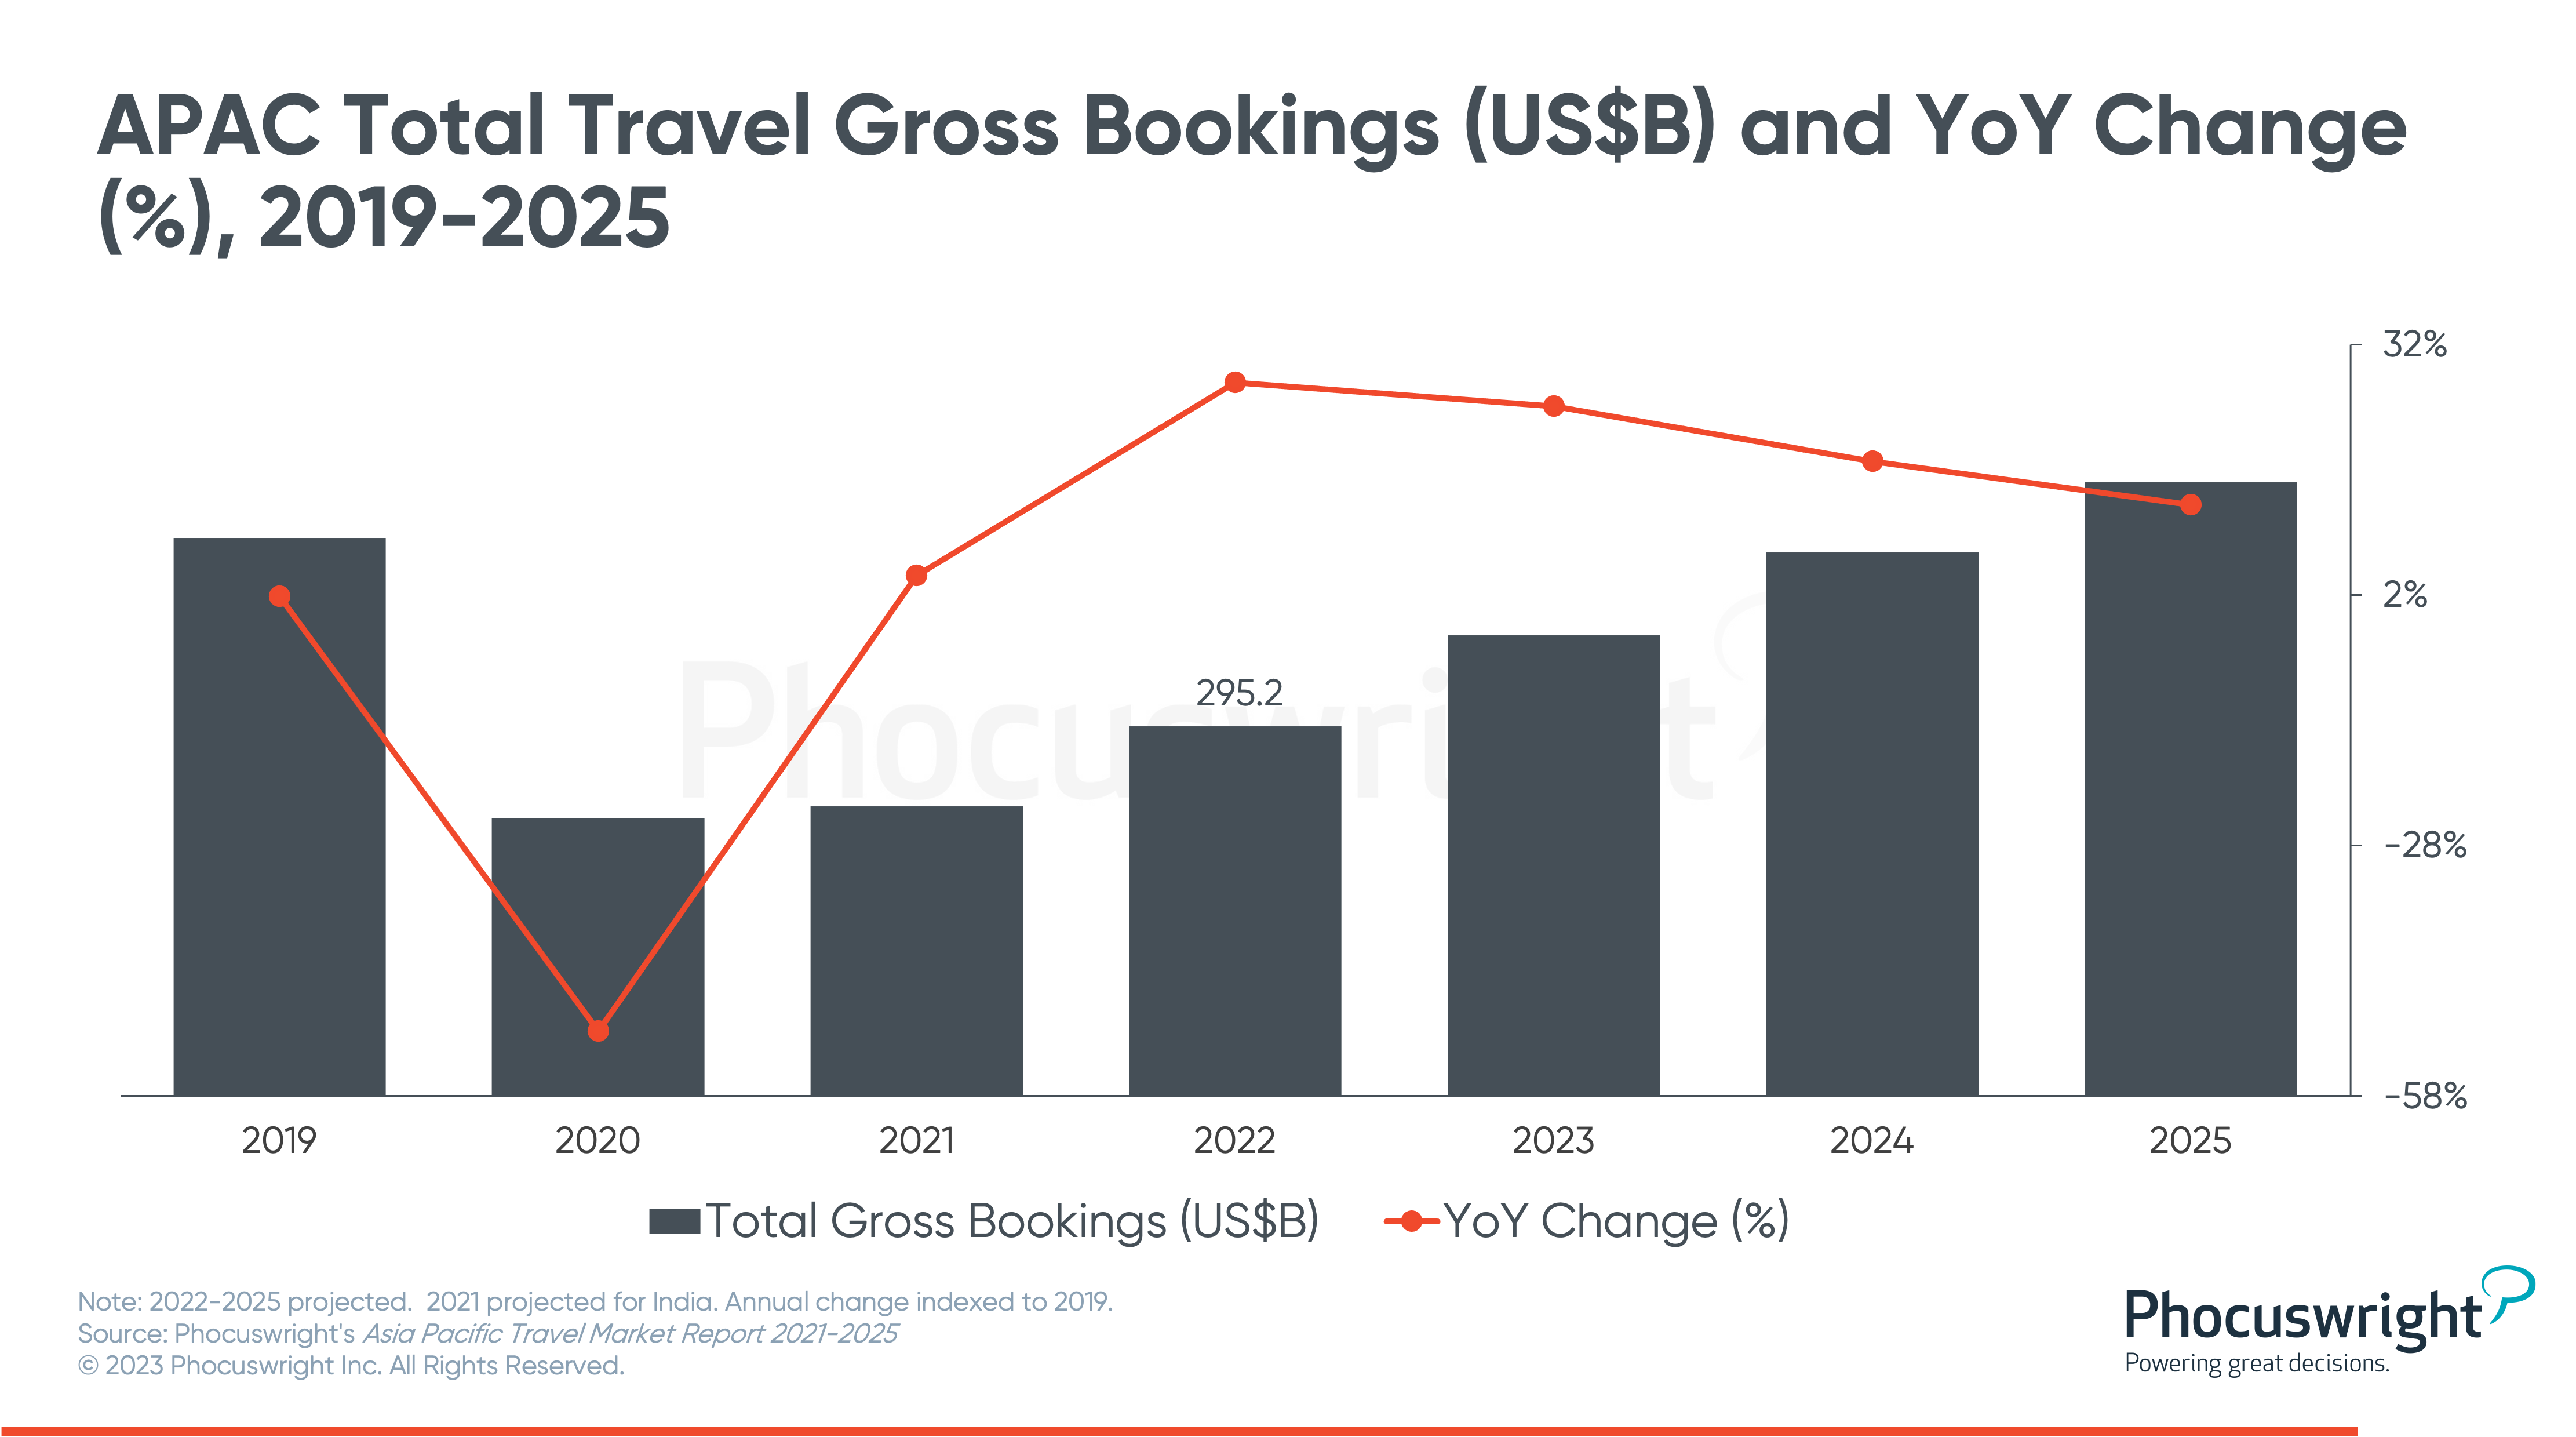 APAC expected to regain top spot as the world's largest regional travel